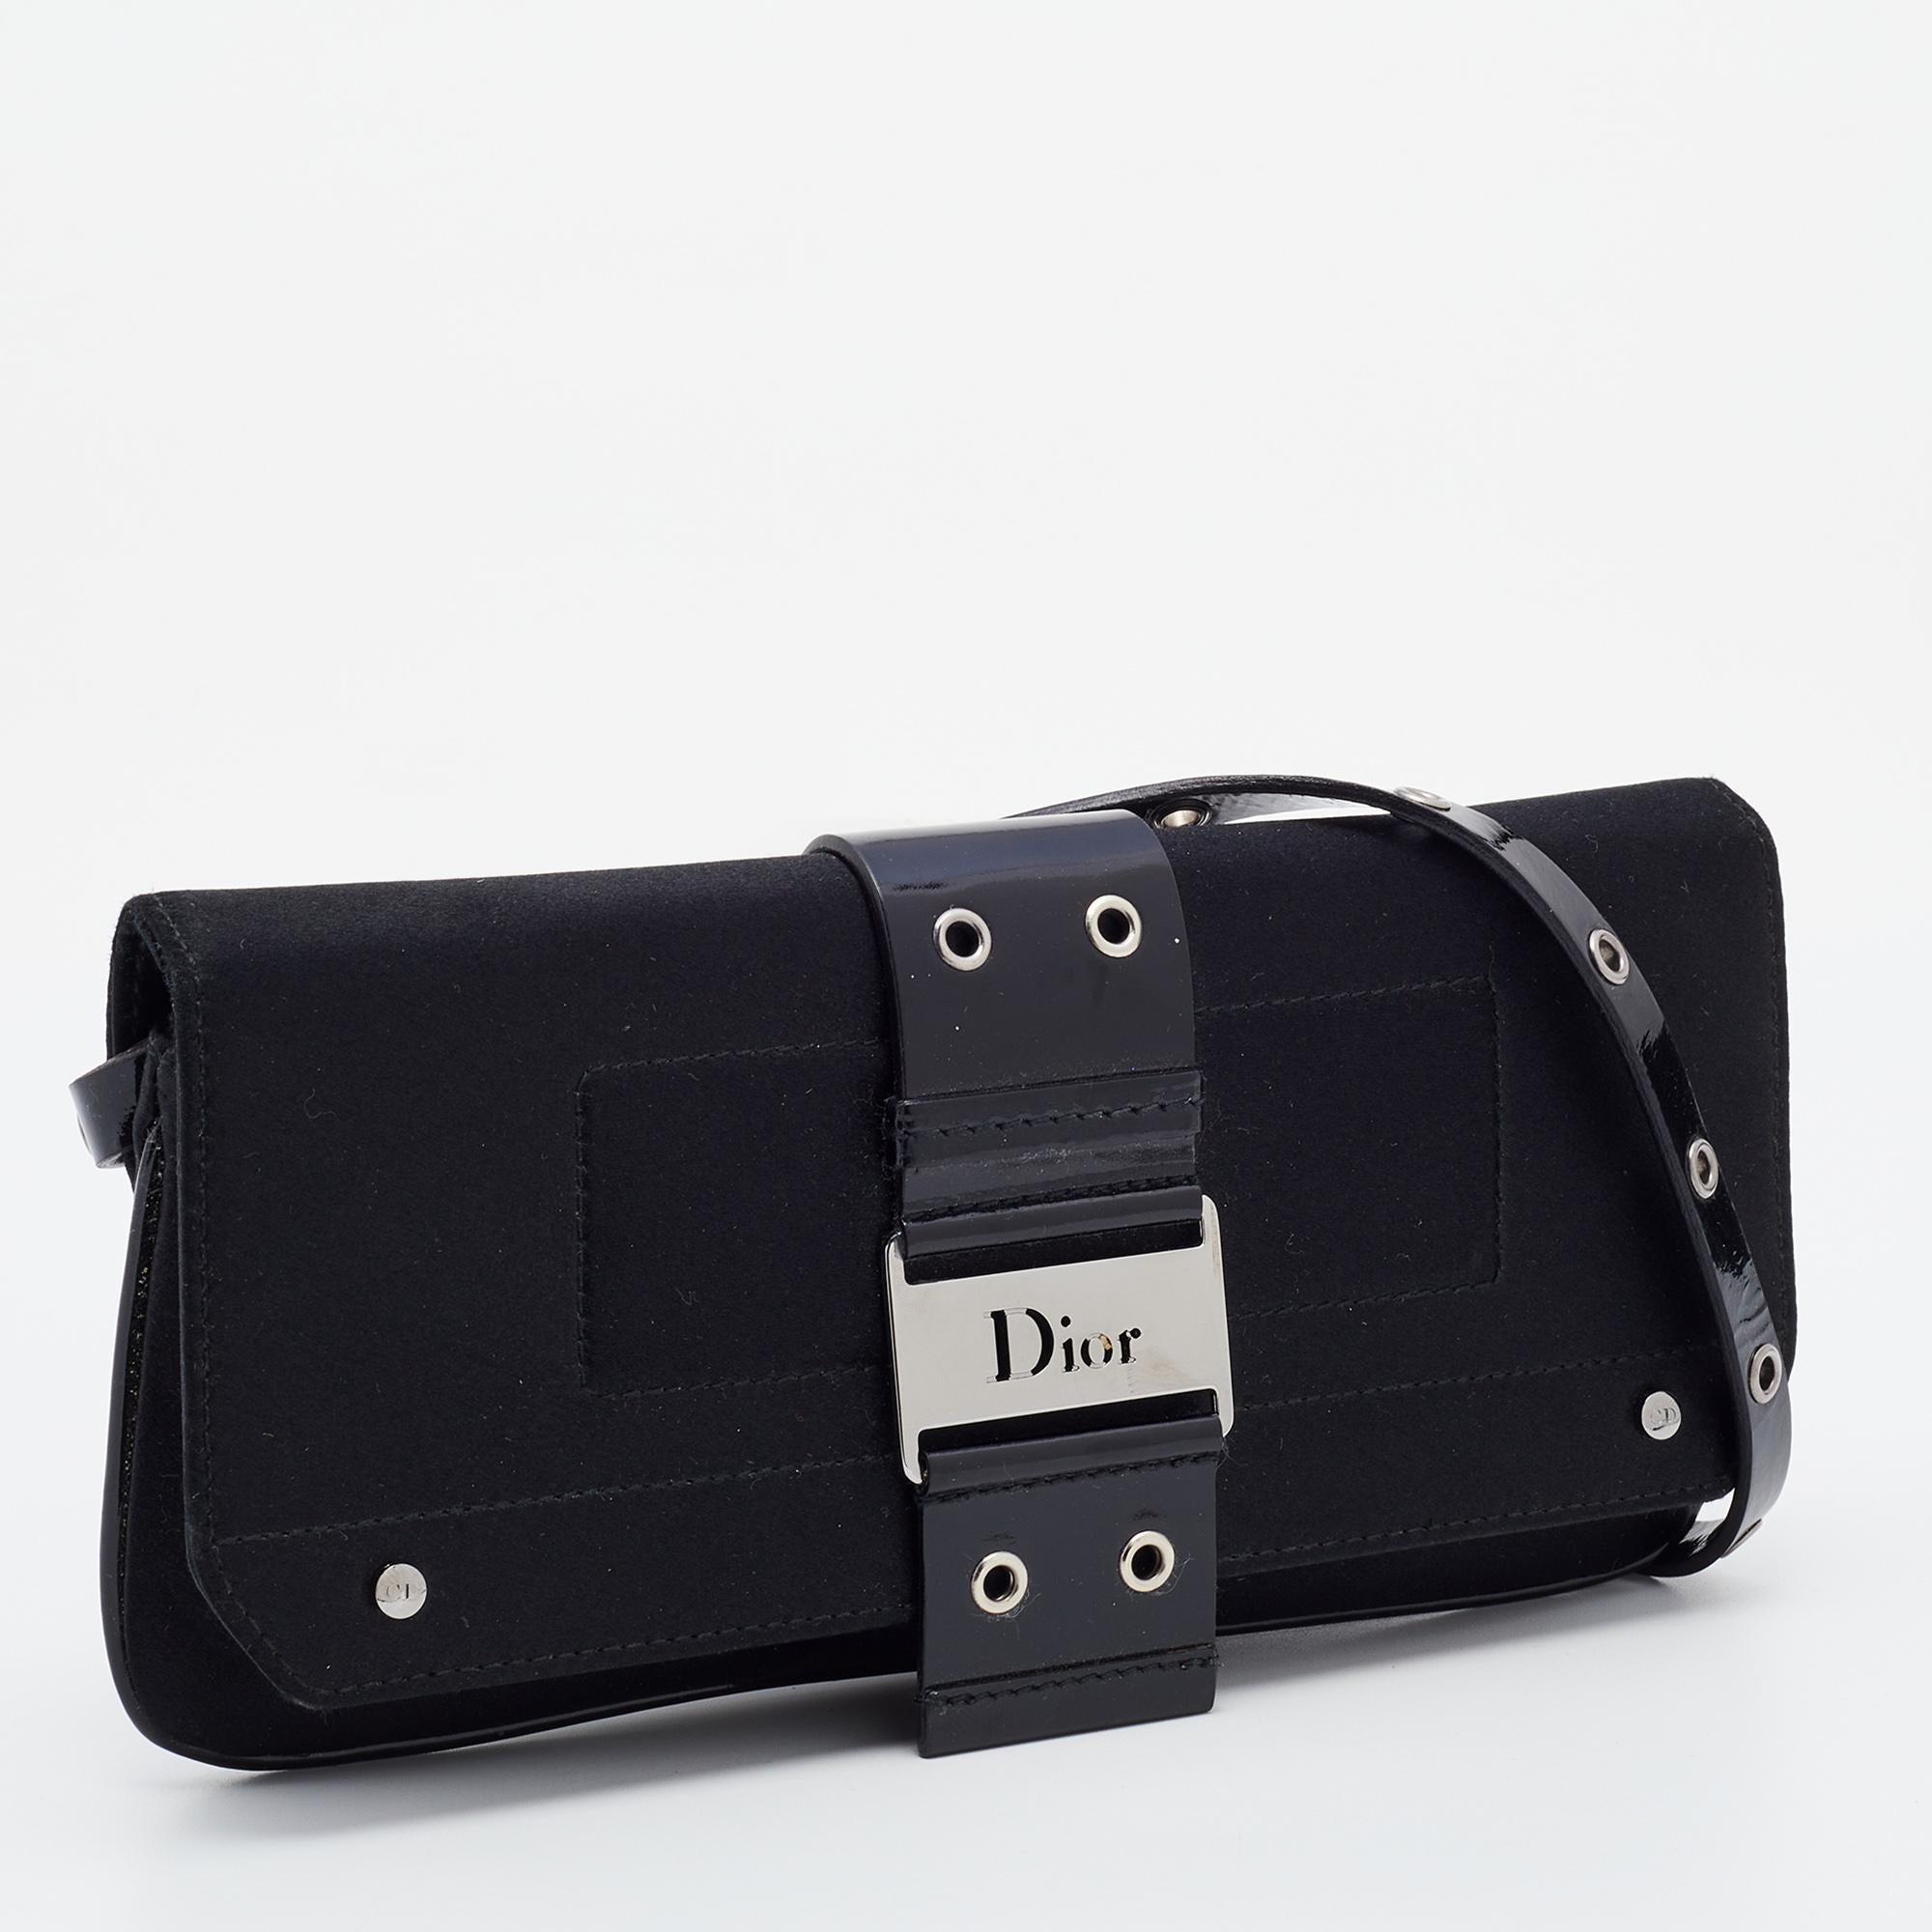 Women's Dior Black Satin And Patent Leather Street Chic Crossbody Bag